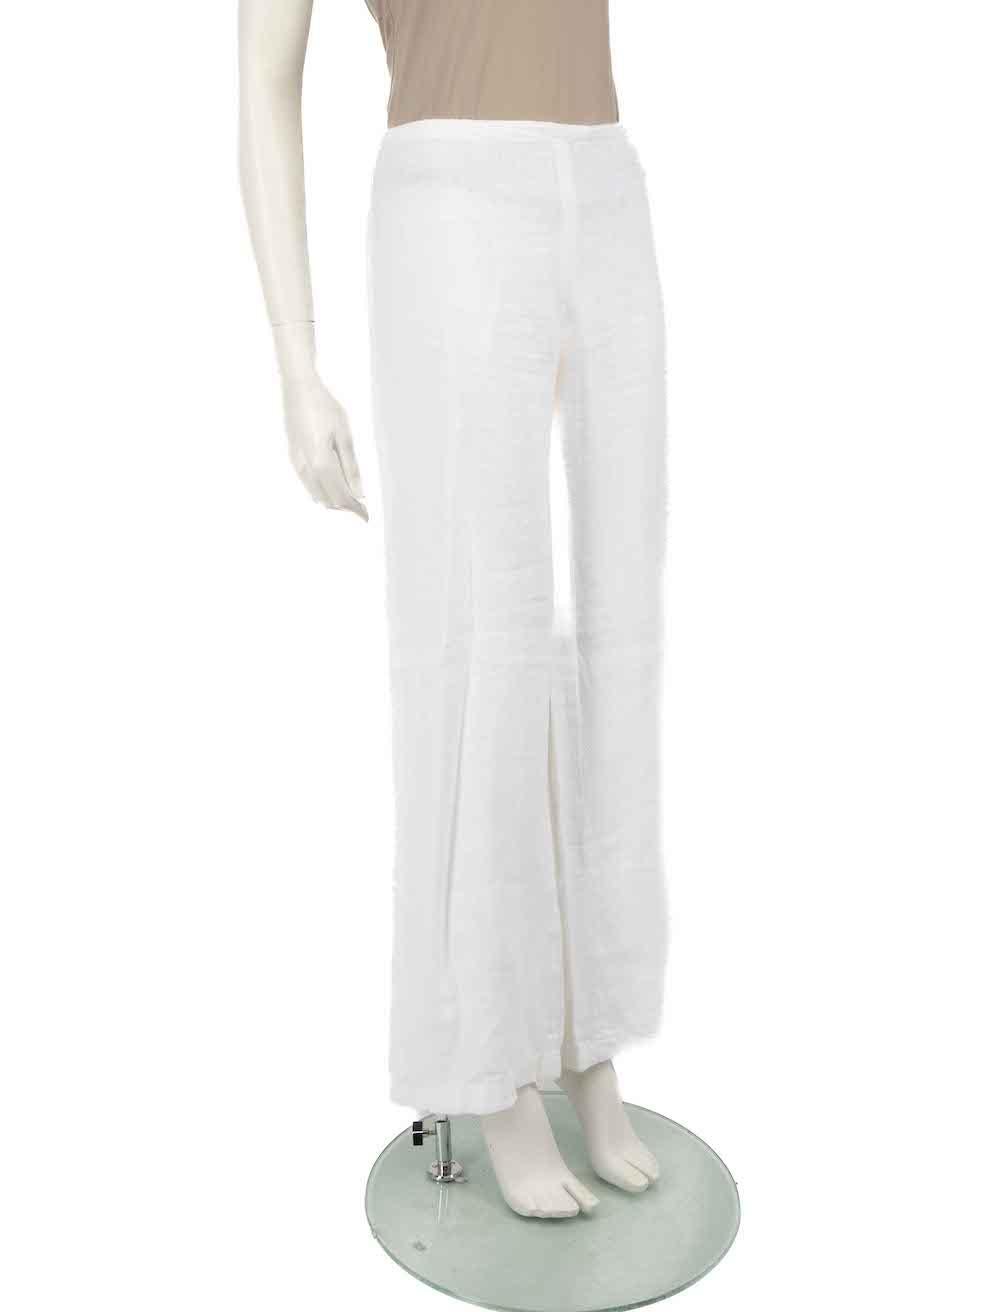 CONDITION is Very good. Minimal wear to trouser is evident. Minimal wear with some light pilling to the crotch area and some pulls to the weave on the centre front can be seen on this used Weekend Max Mara designer resale item.
 
 
 
 Details
 
 
